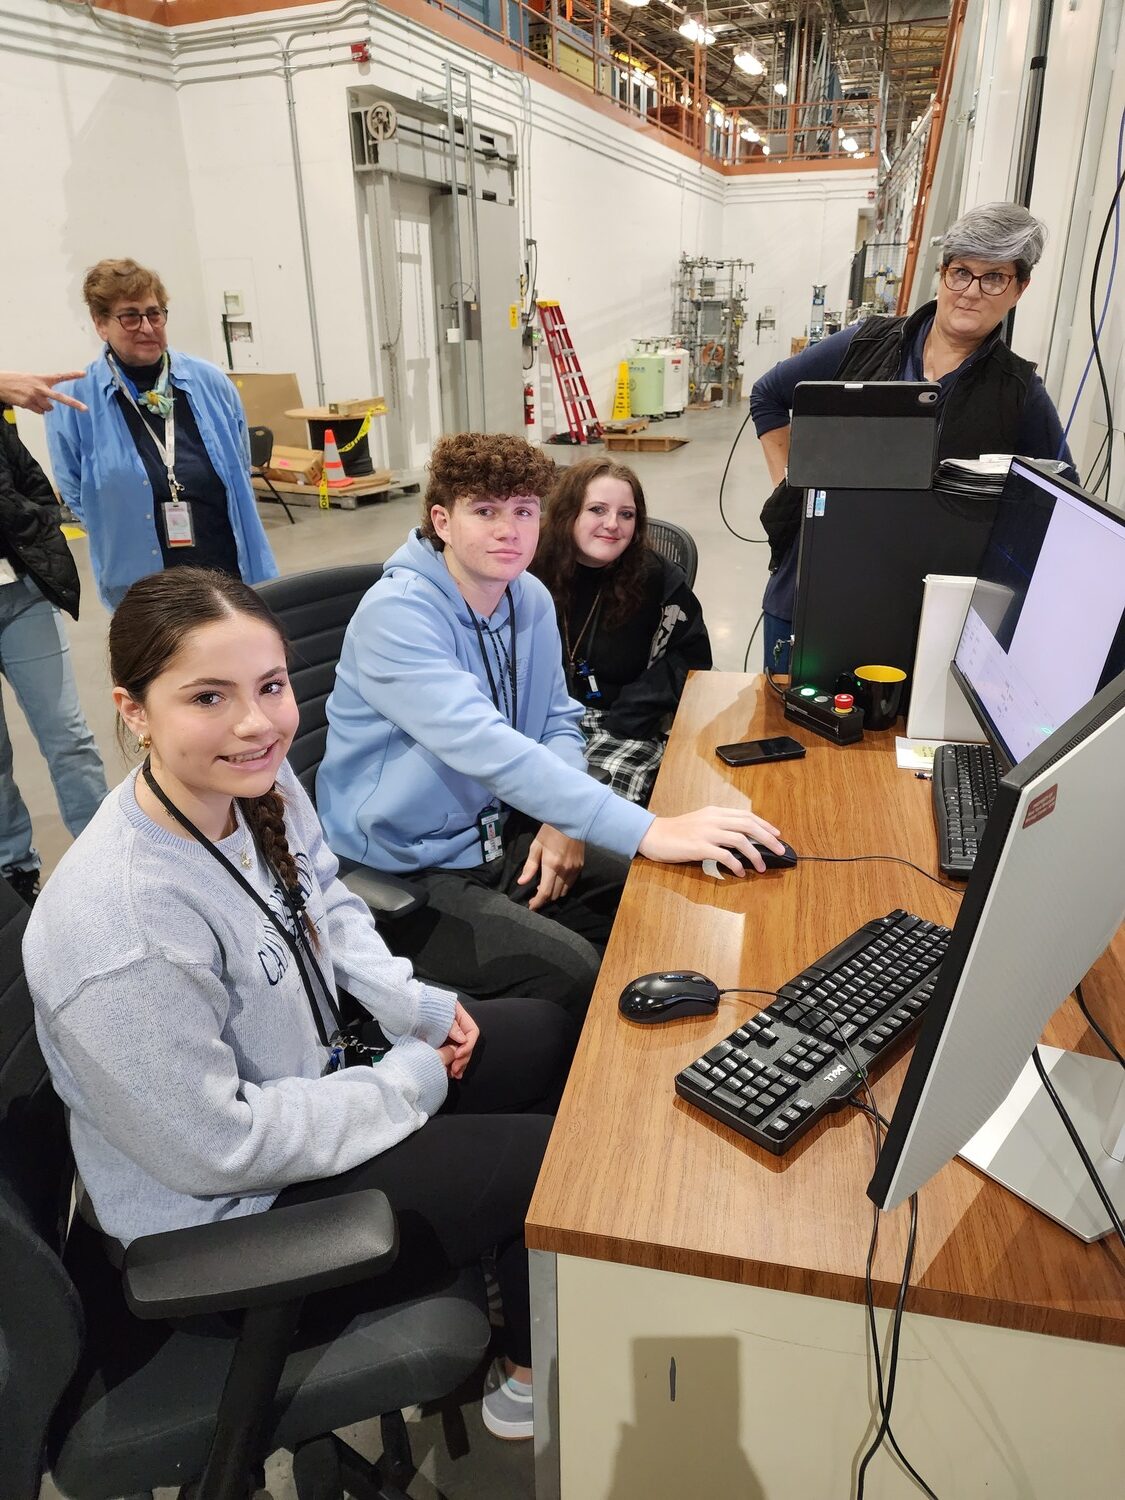 Eastport-South Manor Jr.-Sr. High School student-researchers Elaina Keller, James Lukas, Gianna Dalessandro and teacher Kelly Mackey from Islip High School with, left, beamline scientist Dr. Vivian Stojanoff during a recent visit to Brookhaven National Laboratory. Through their collaboration with Brookhaven National Laboratory’s SPARK Program, research students visited the National Synchrotron Light Source II at BNL to collect X-ray diffraction data on the protein beta lactamase. COURTESY EASTPORT-SOUTH MANOR SCHOOL DISTRICT